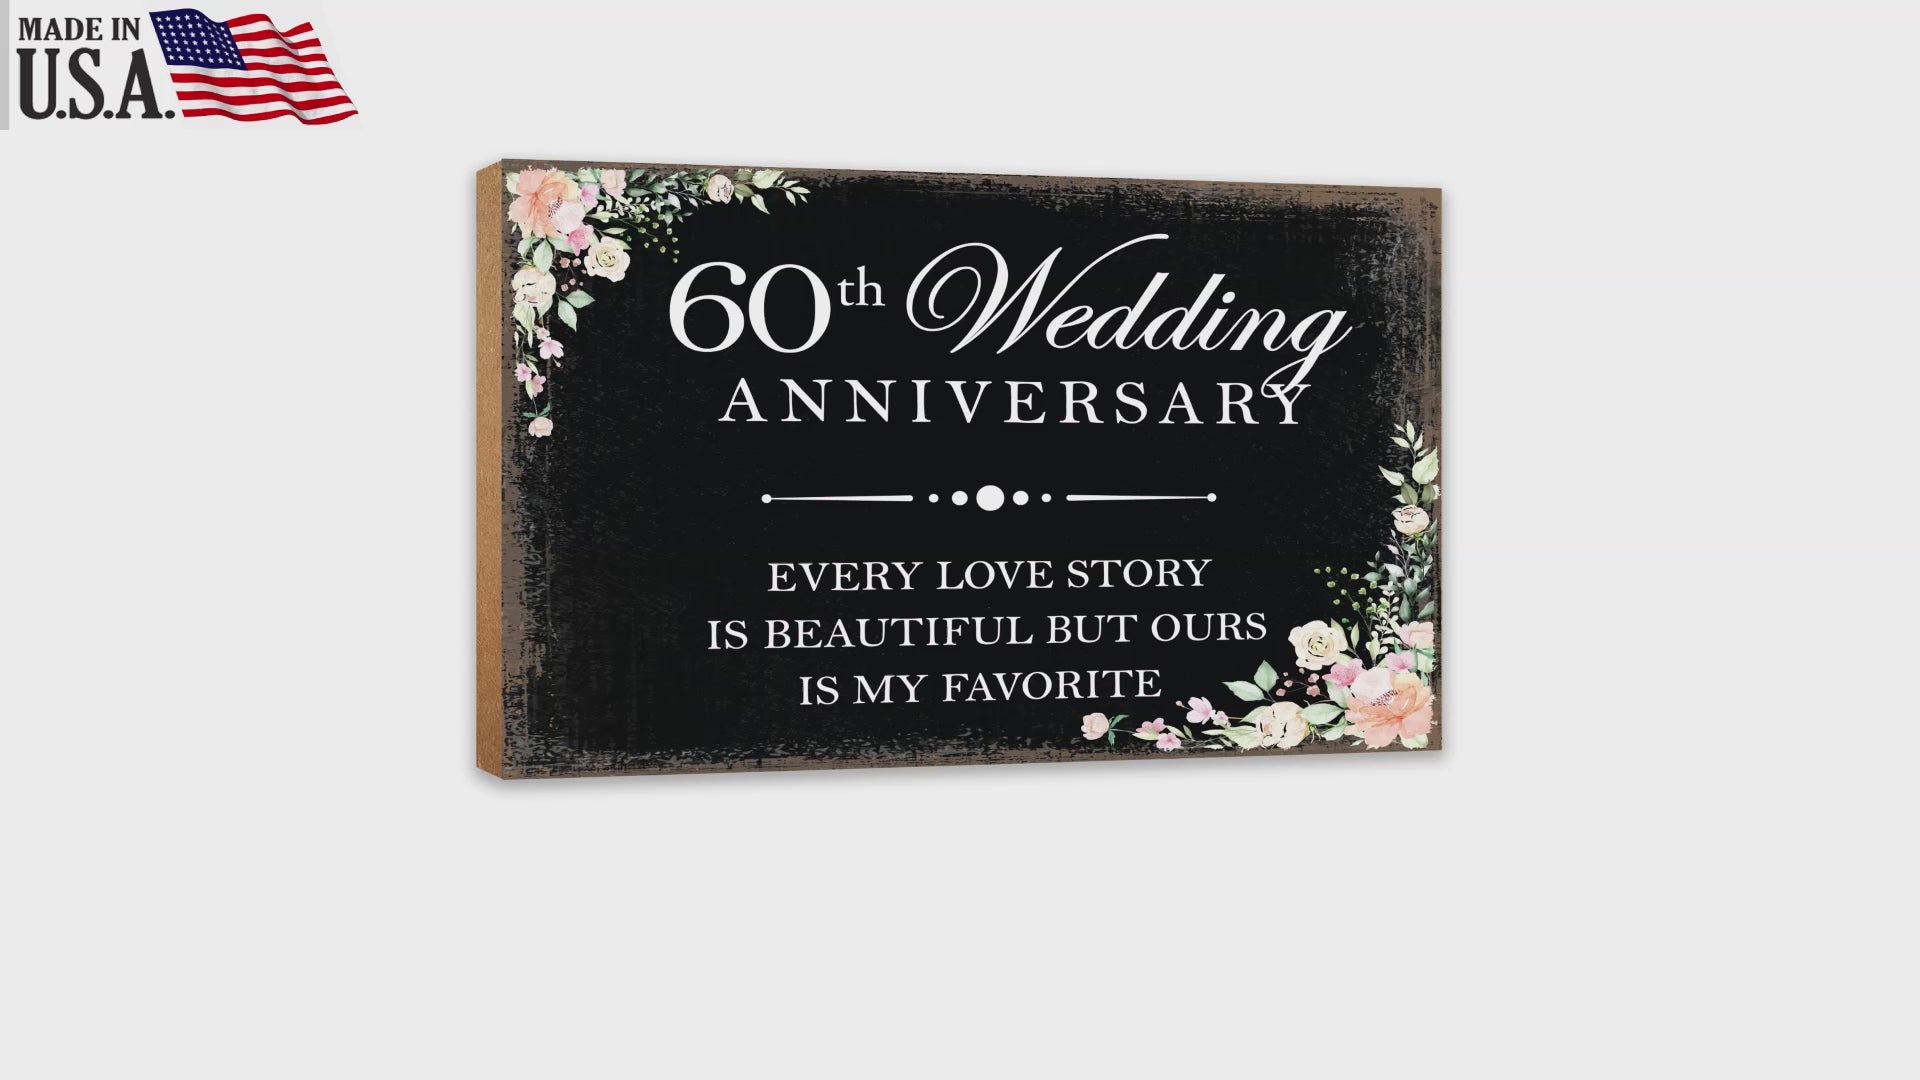 60th Wedding Anniversary Unique Shelf Decor and Tabletop Signs Gift for Couples - Every Love Story